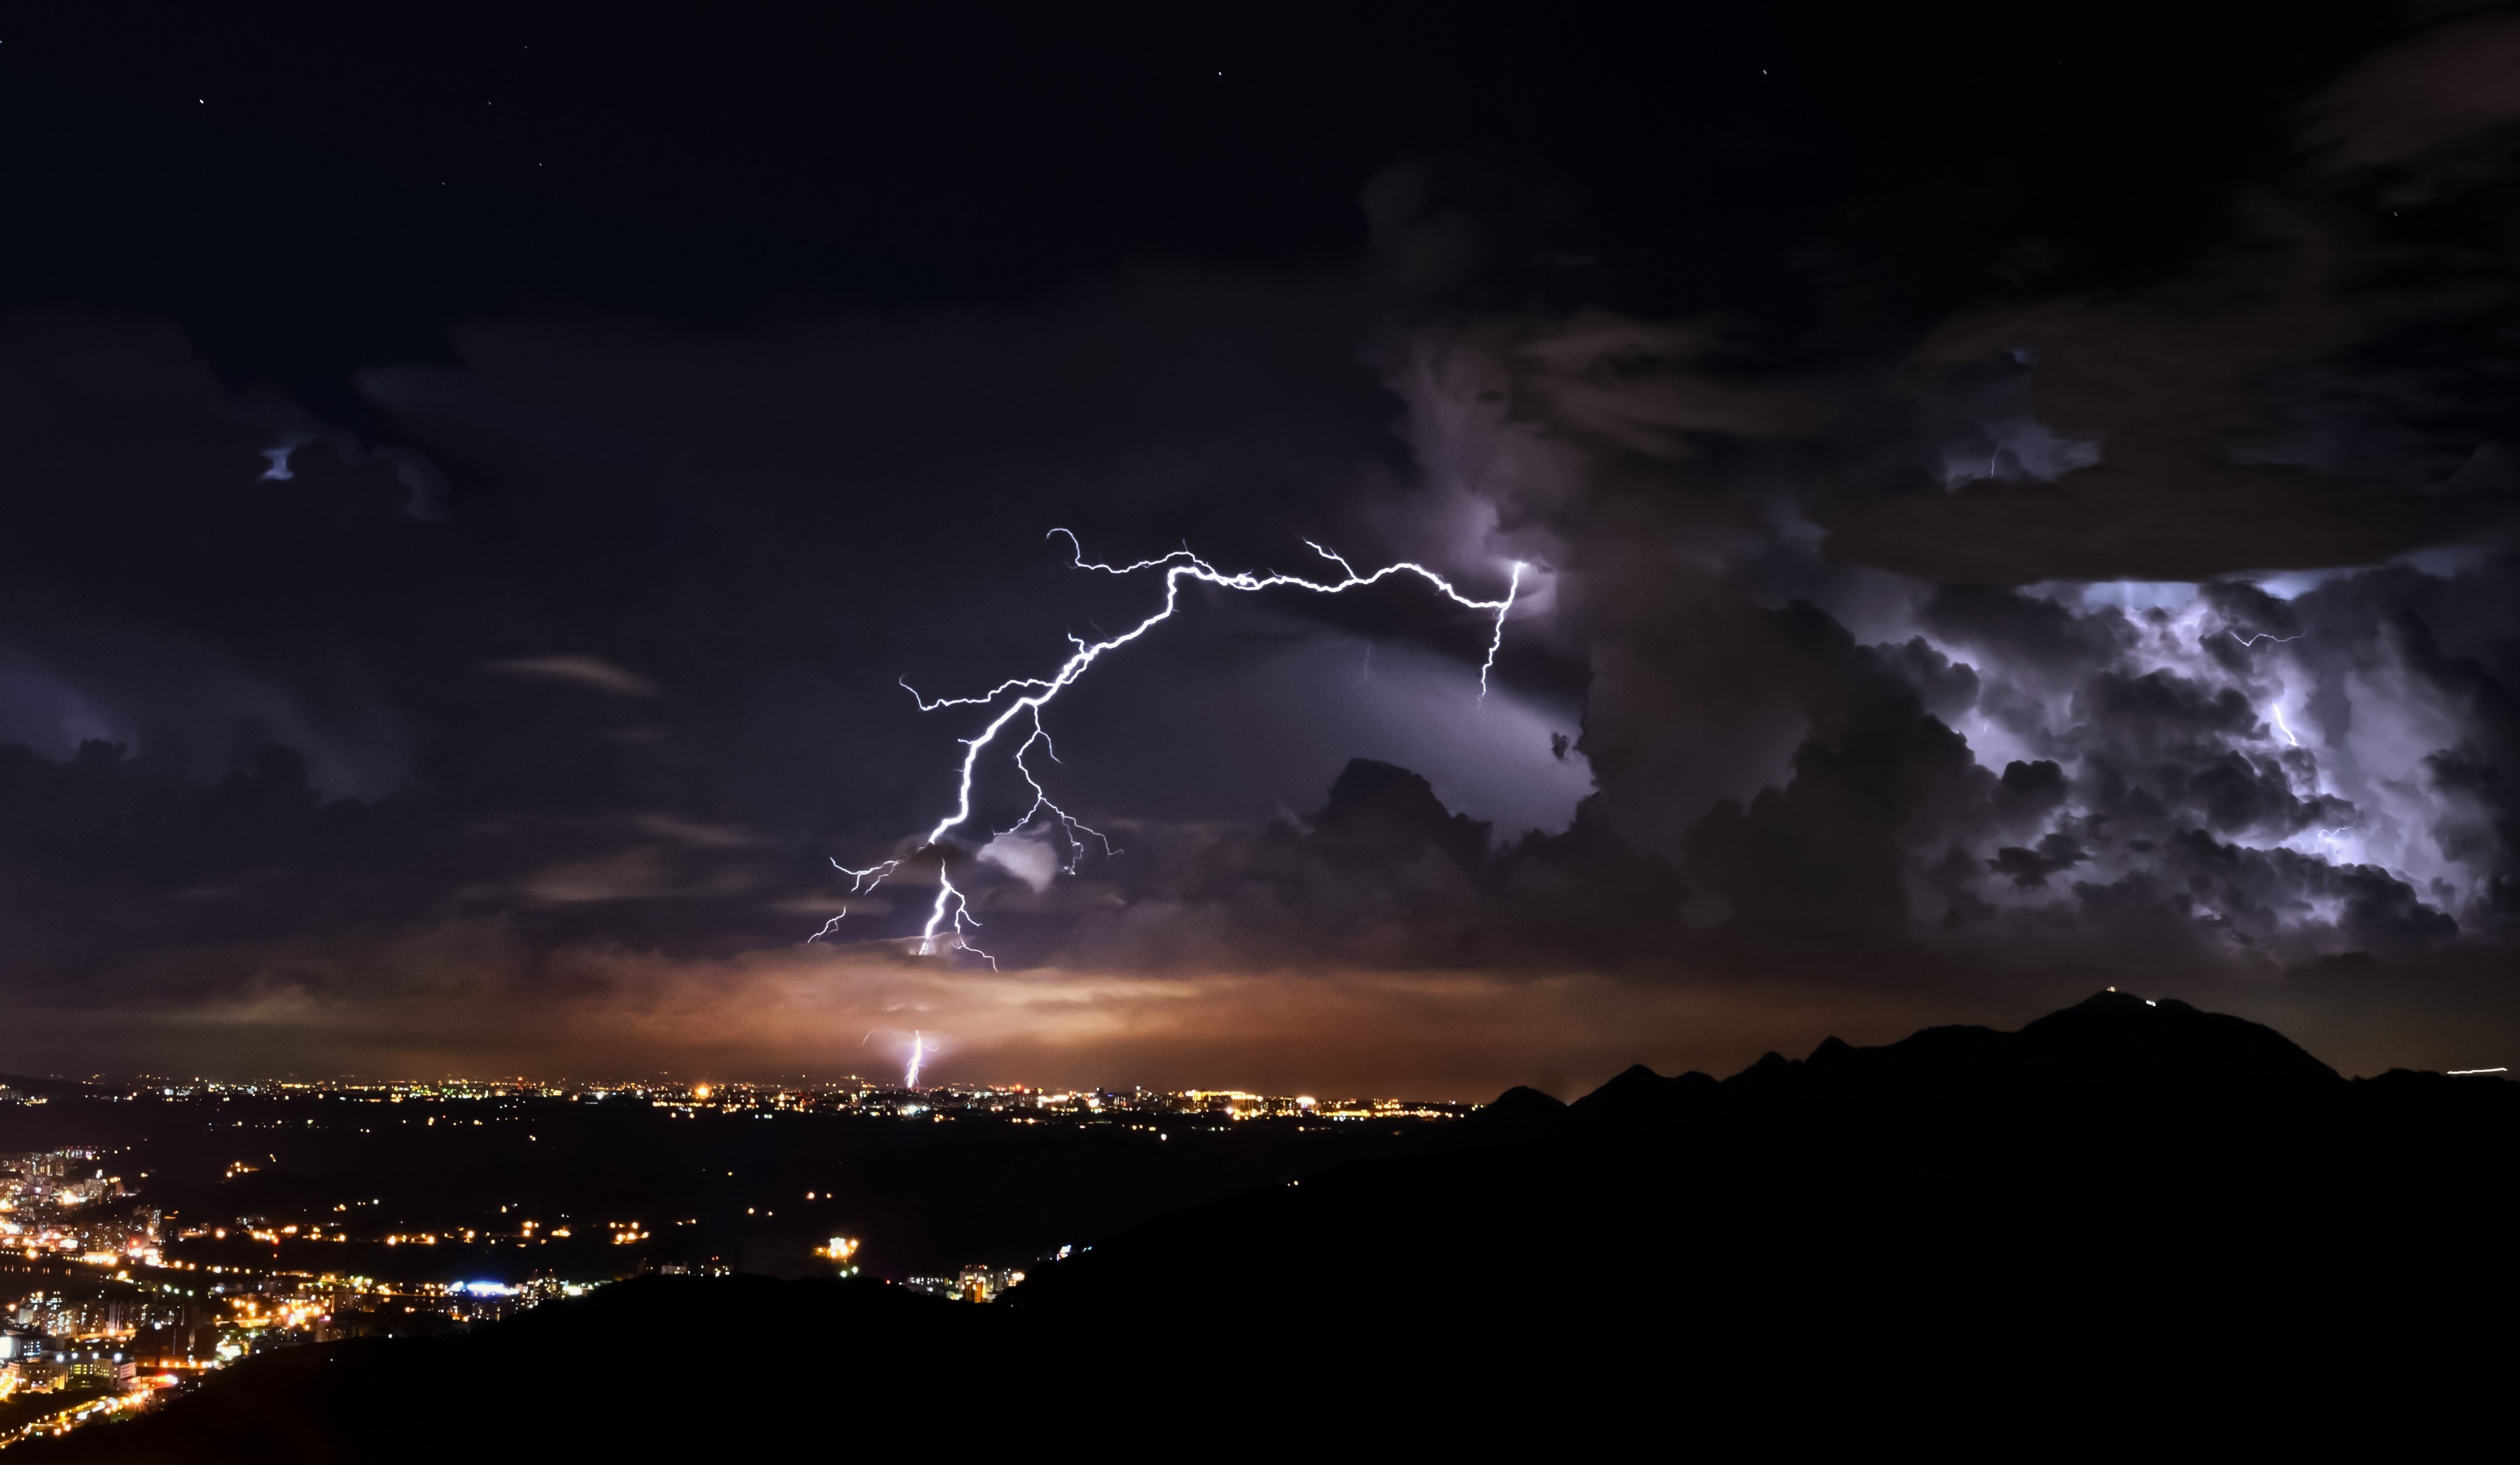 nature, Landscape, Clouds, Lightning, Night, Storm, Cityscape, City lights, Mountains, Silhouette Wallpaper